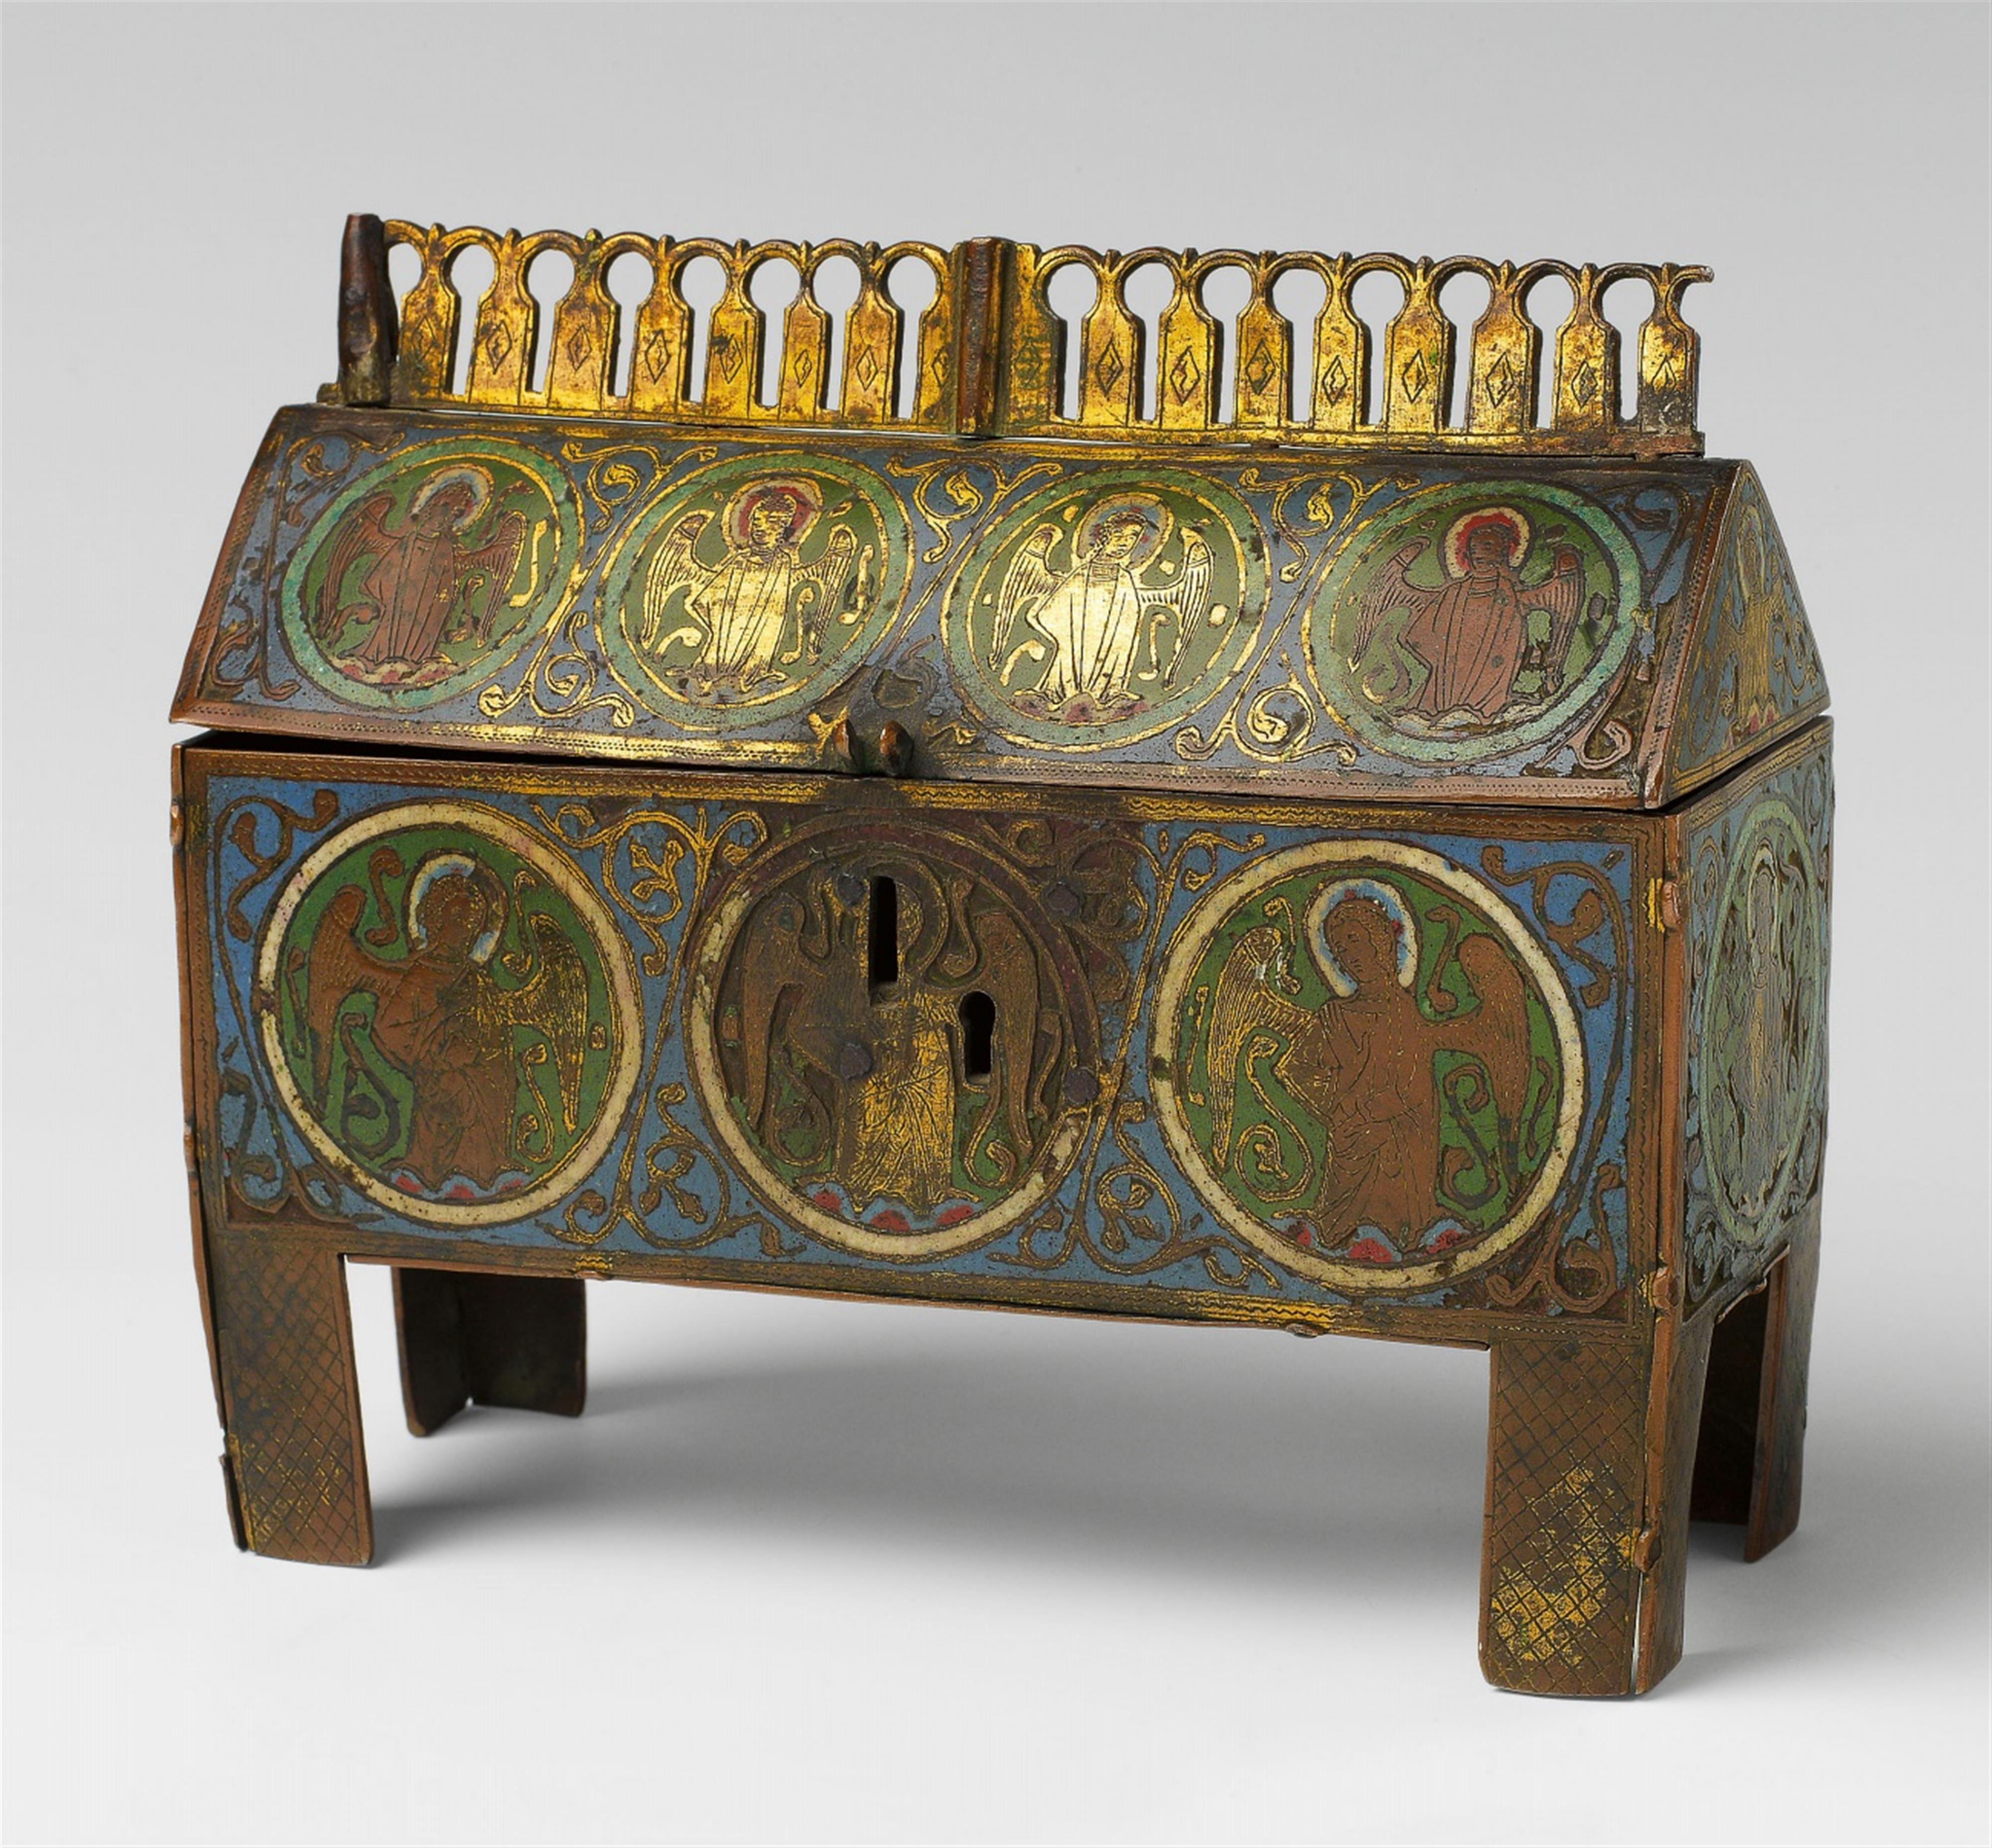 A Limoges enamel reliquary casket with angels - image-1